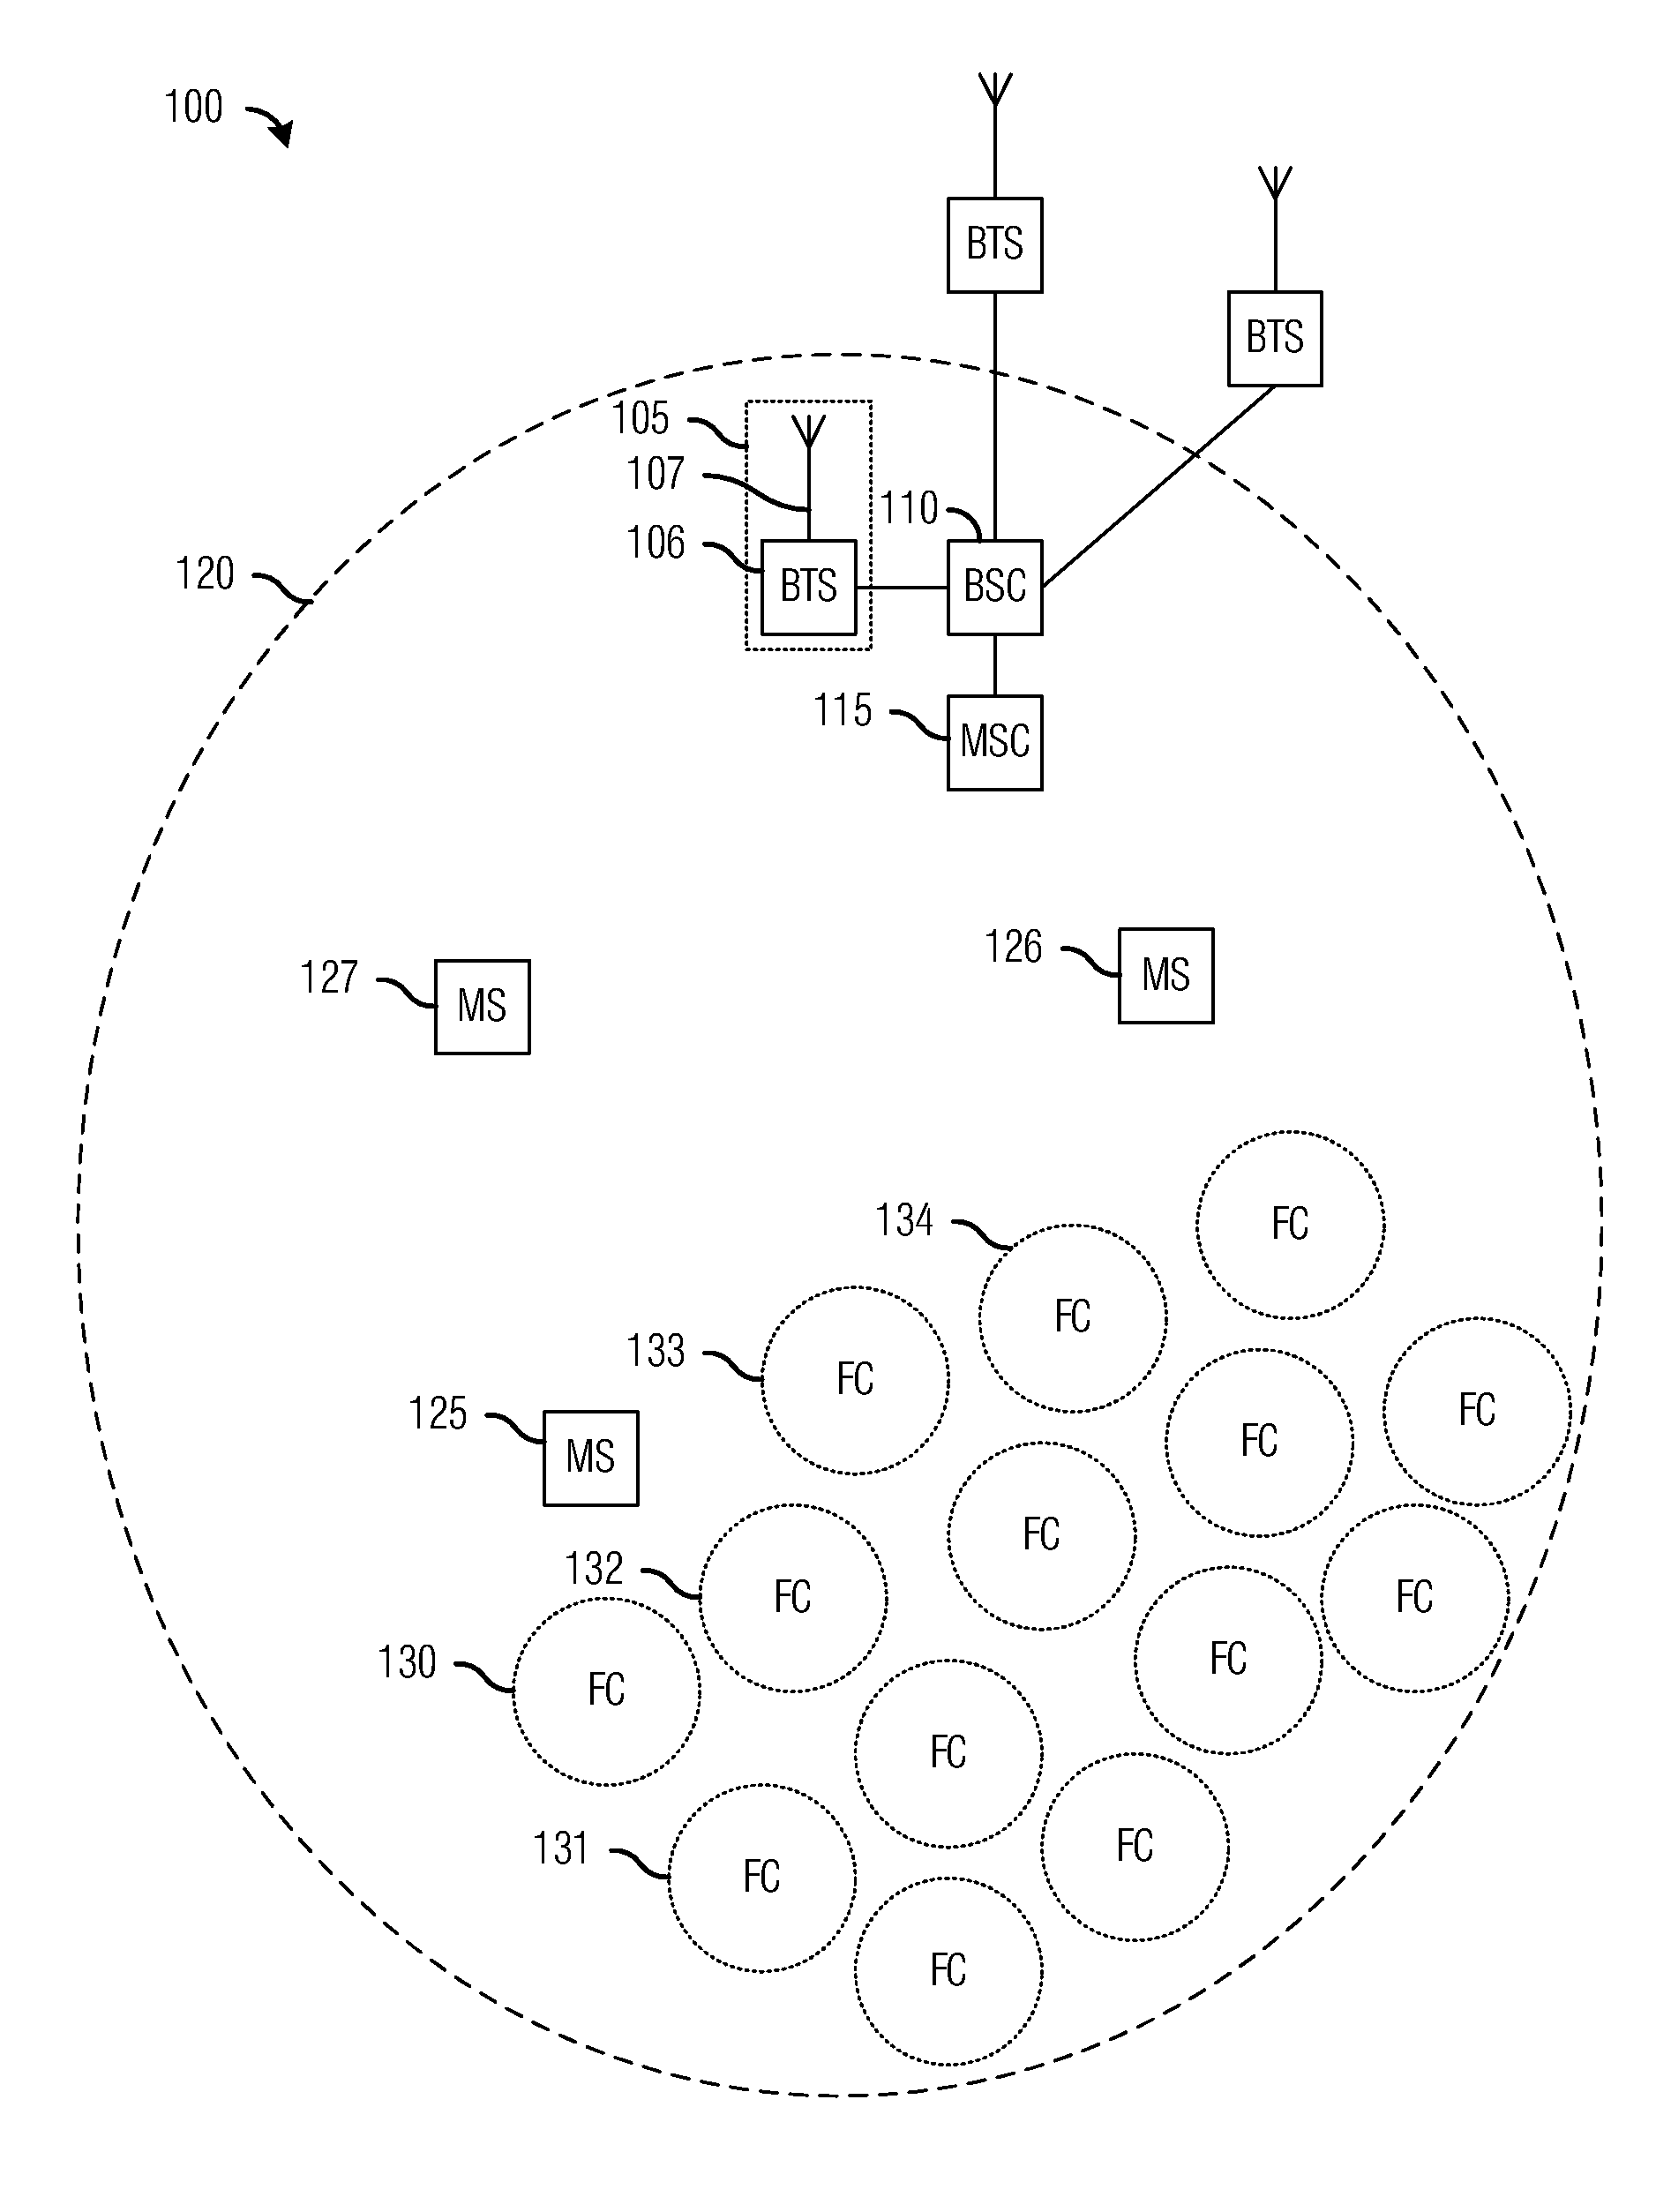 System and Method for Providing Connection Handoffs in Wireless Networks